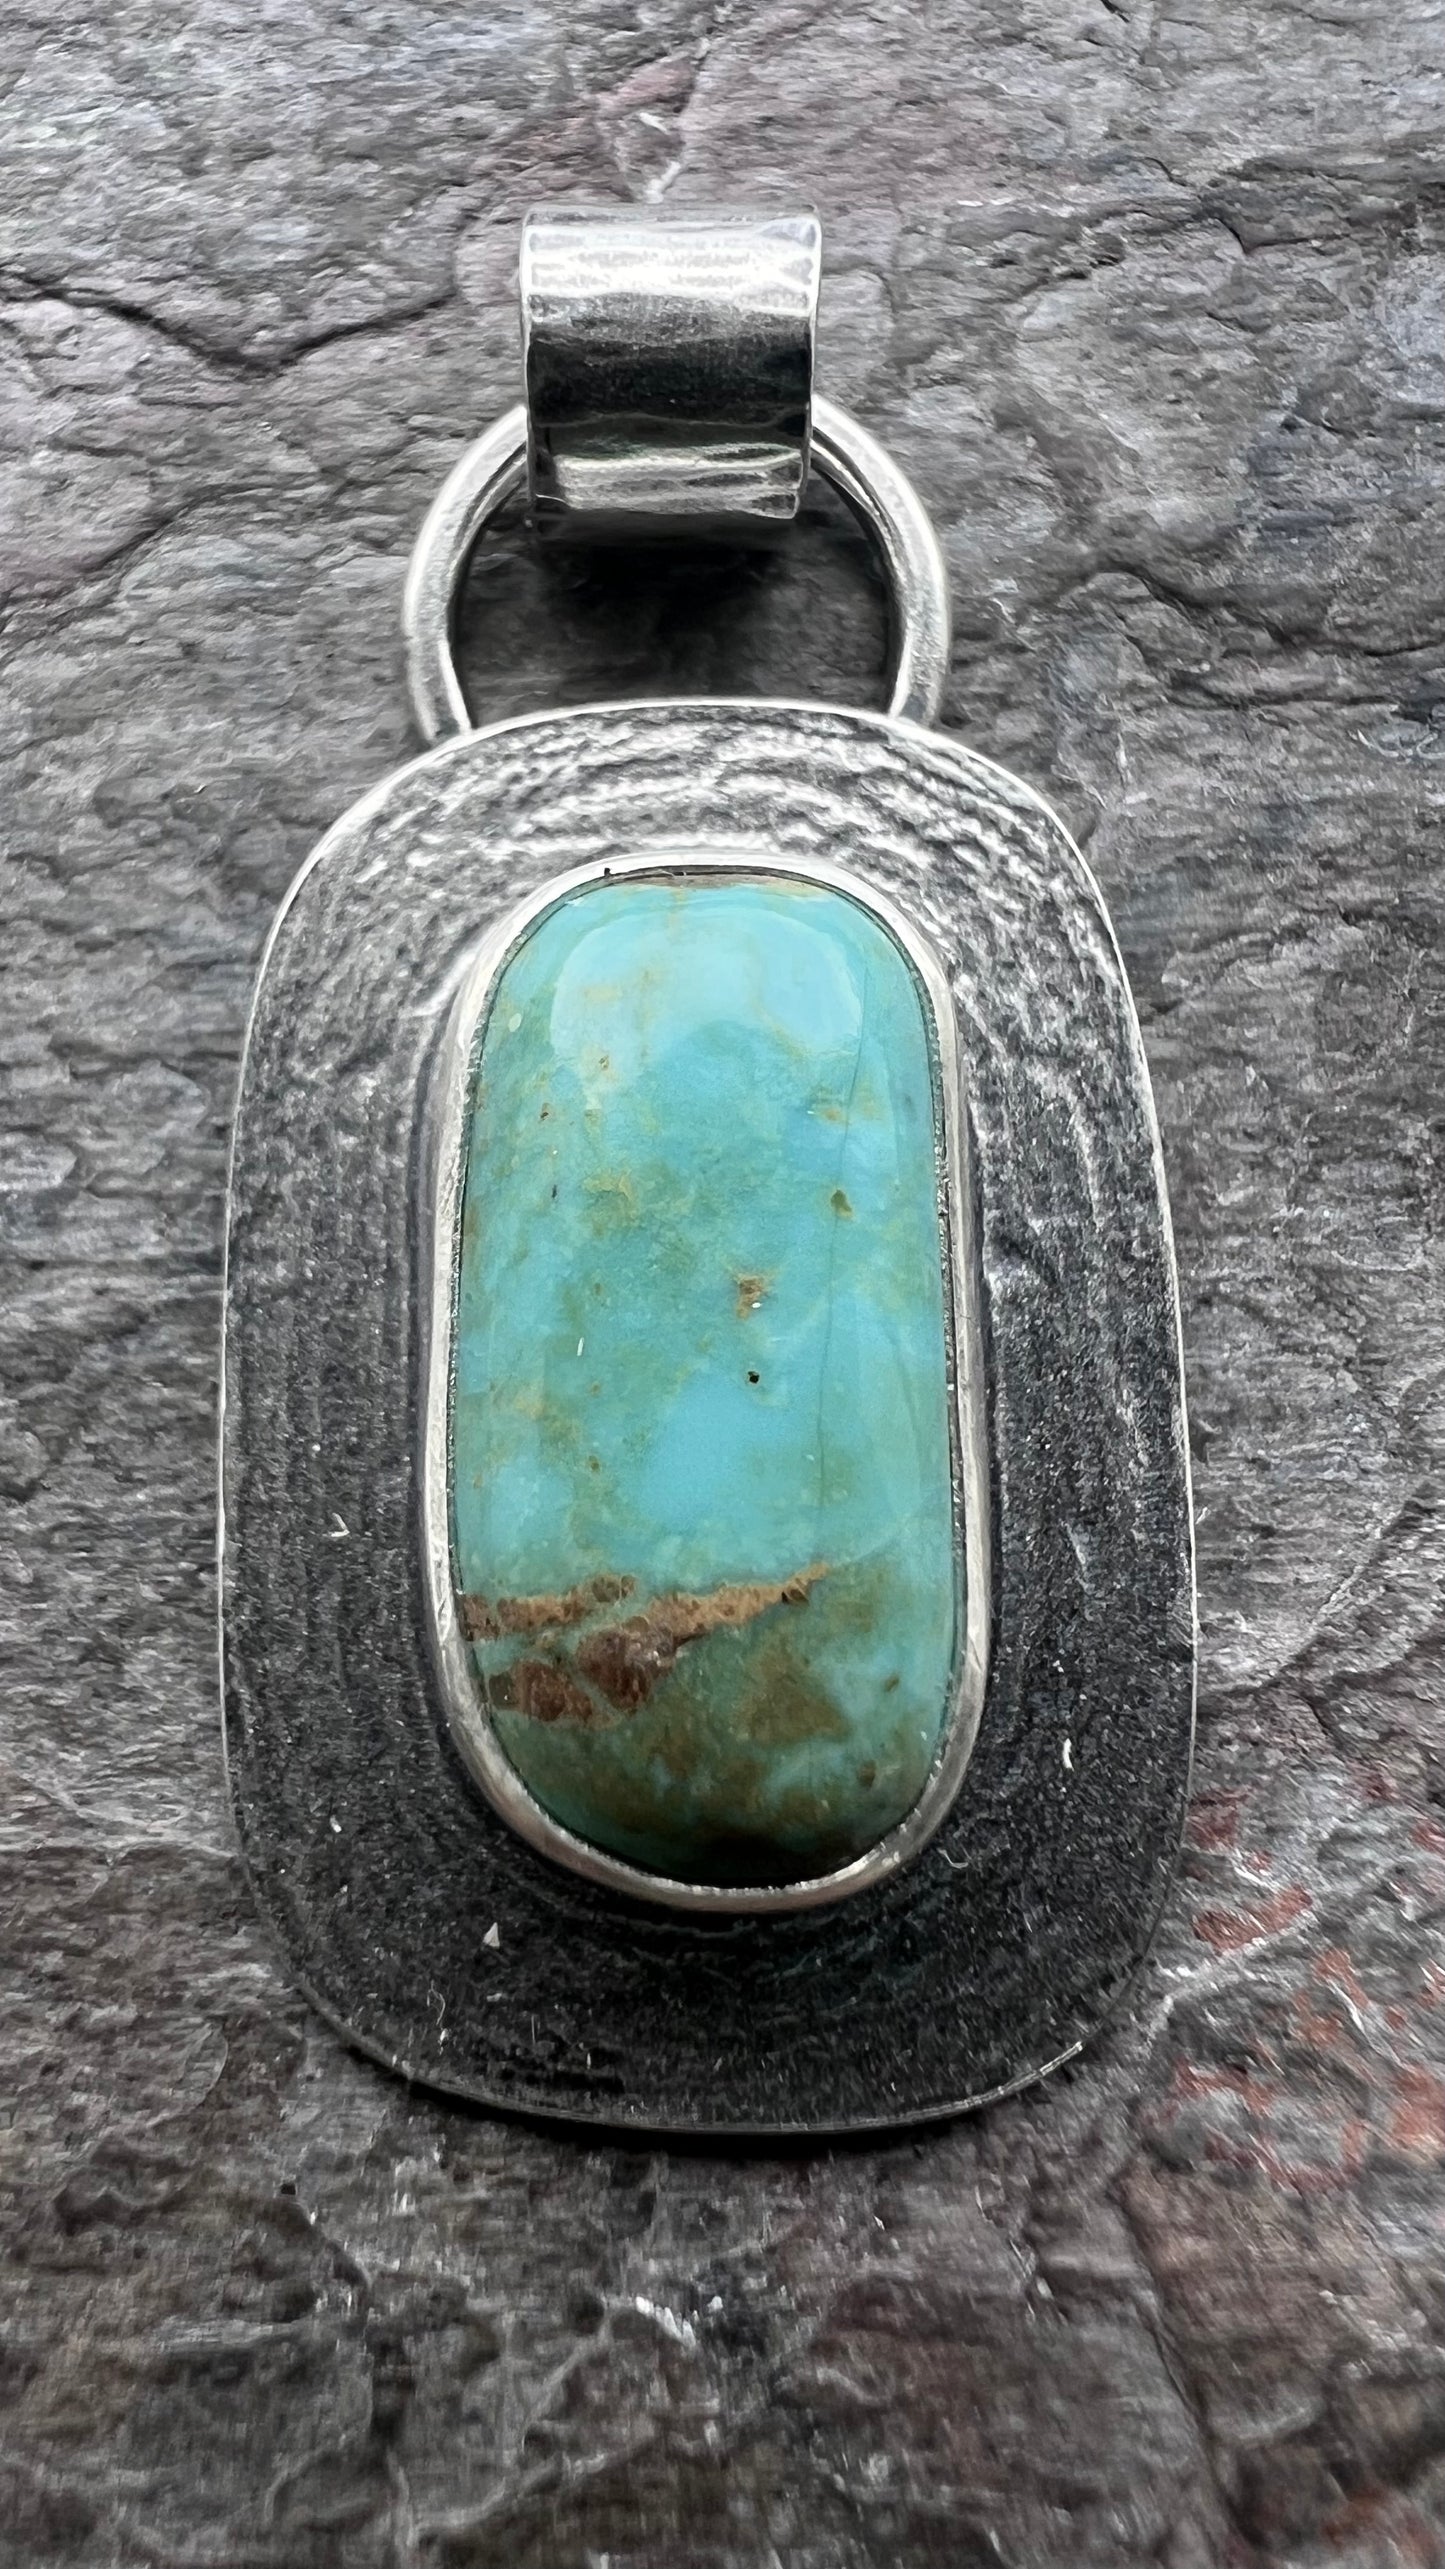 Turquoise Sterling Silver Rectangular Pendant - One-of-a-Kind Handmade Pendant